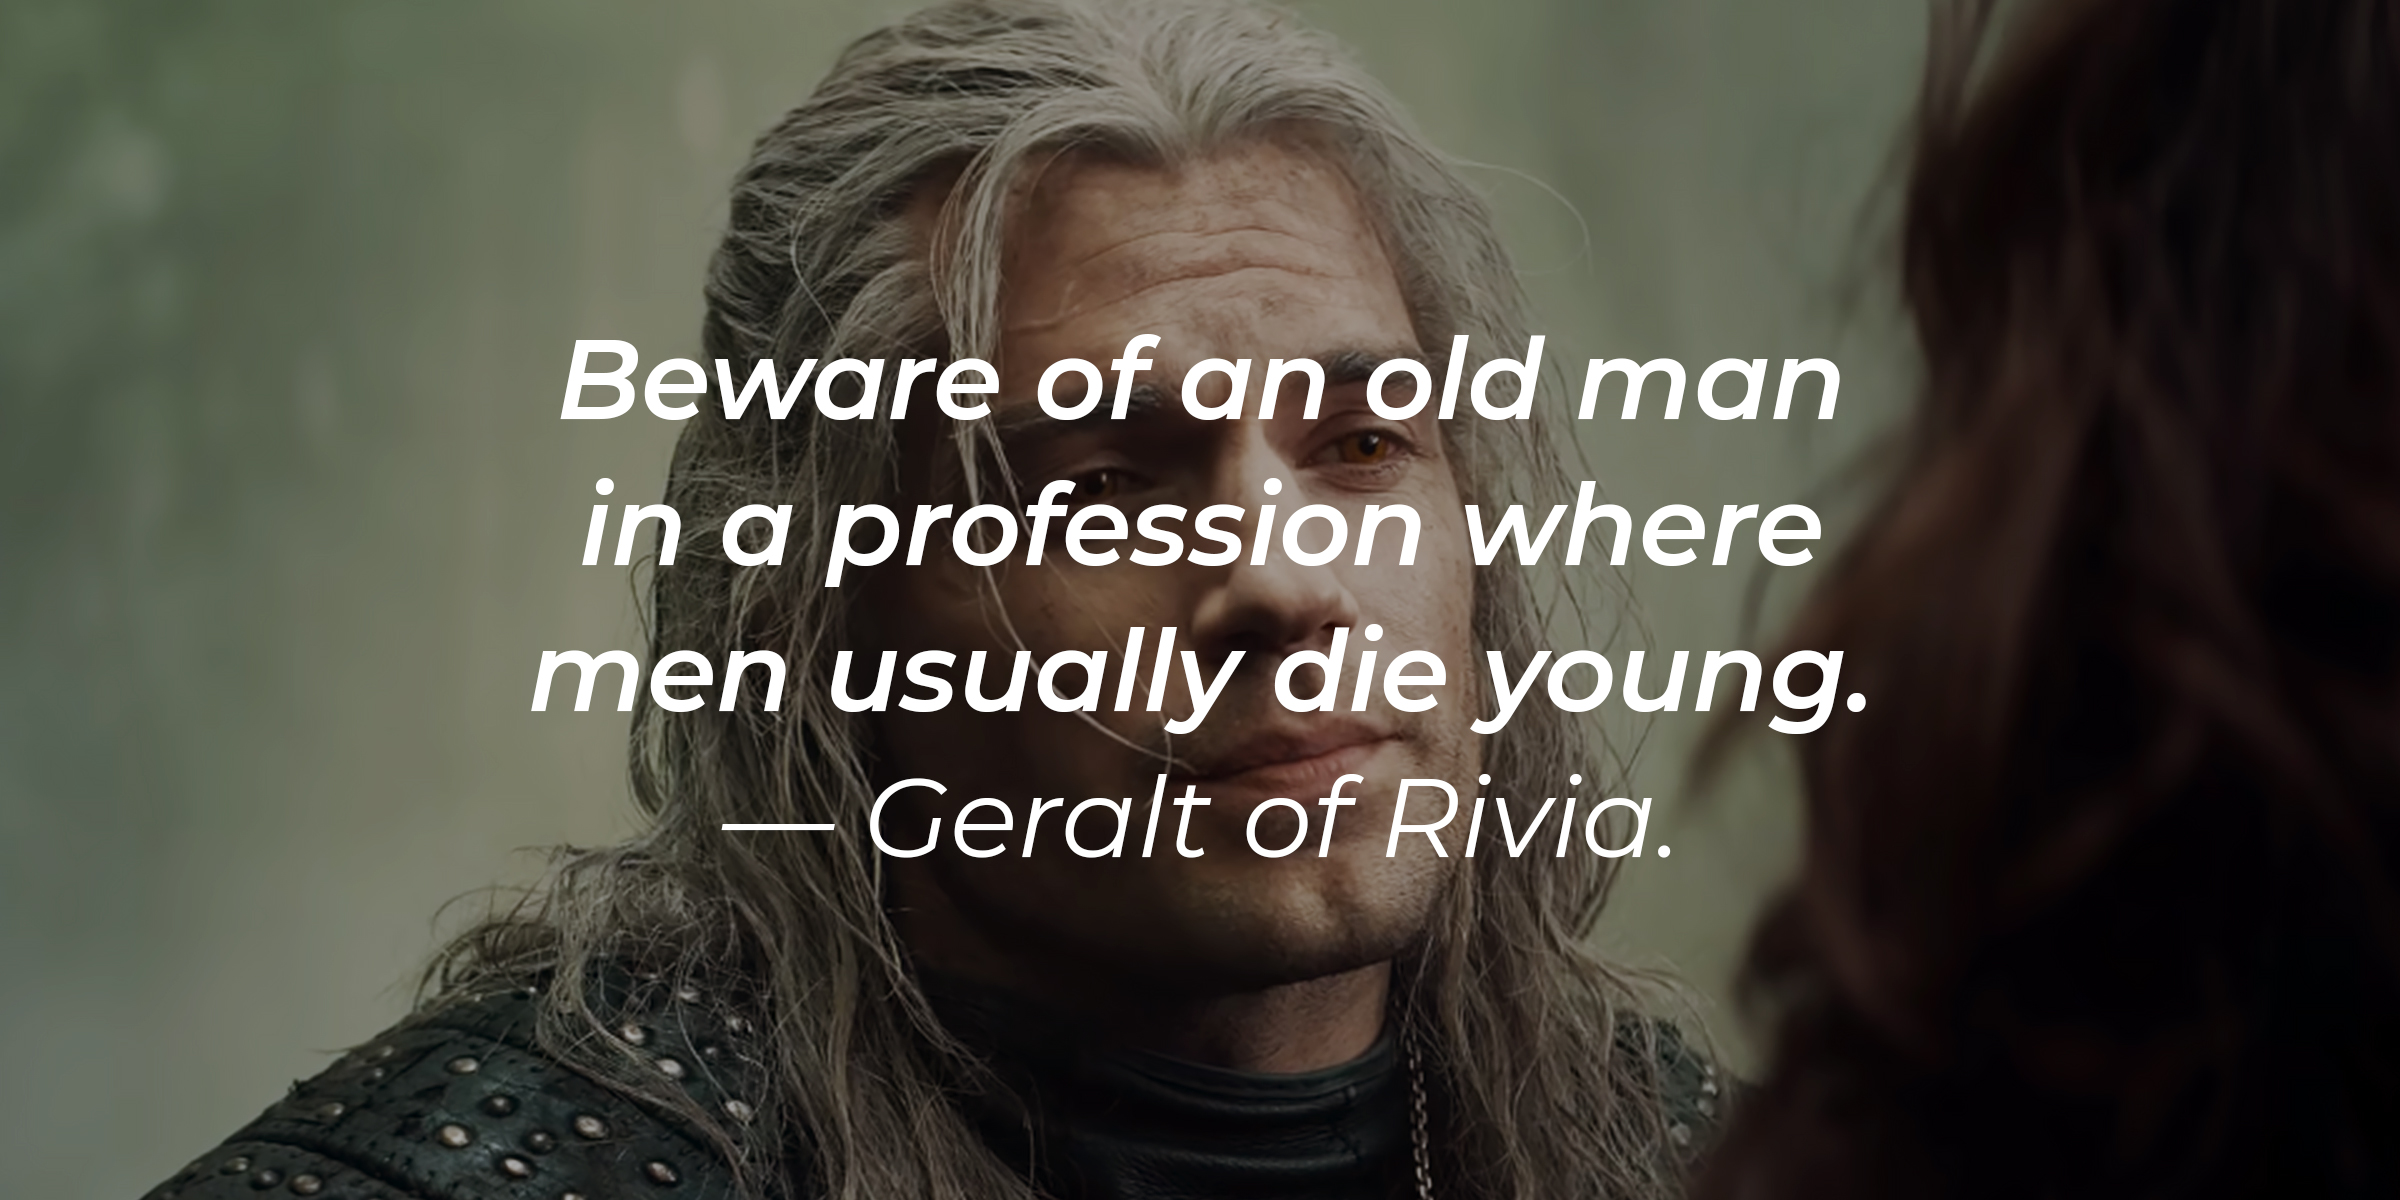 Geralt of Rivia's quote: "Beware of an old man in a profession where men usually die young." | Source: YouTube/Netflix